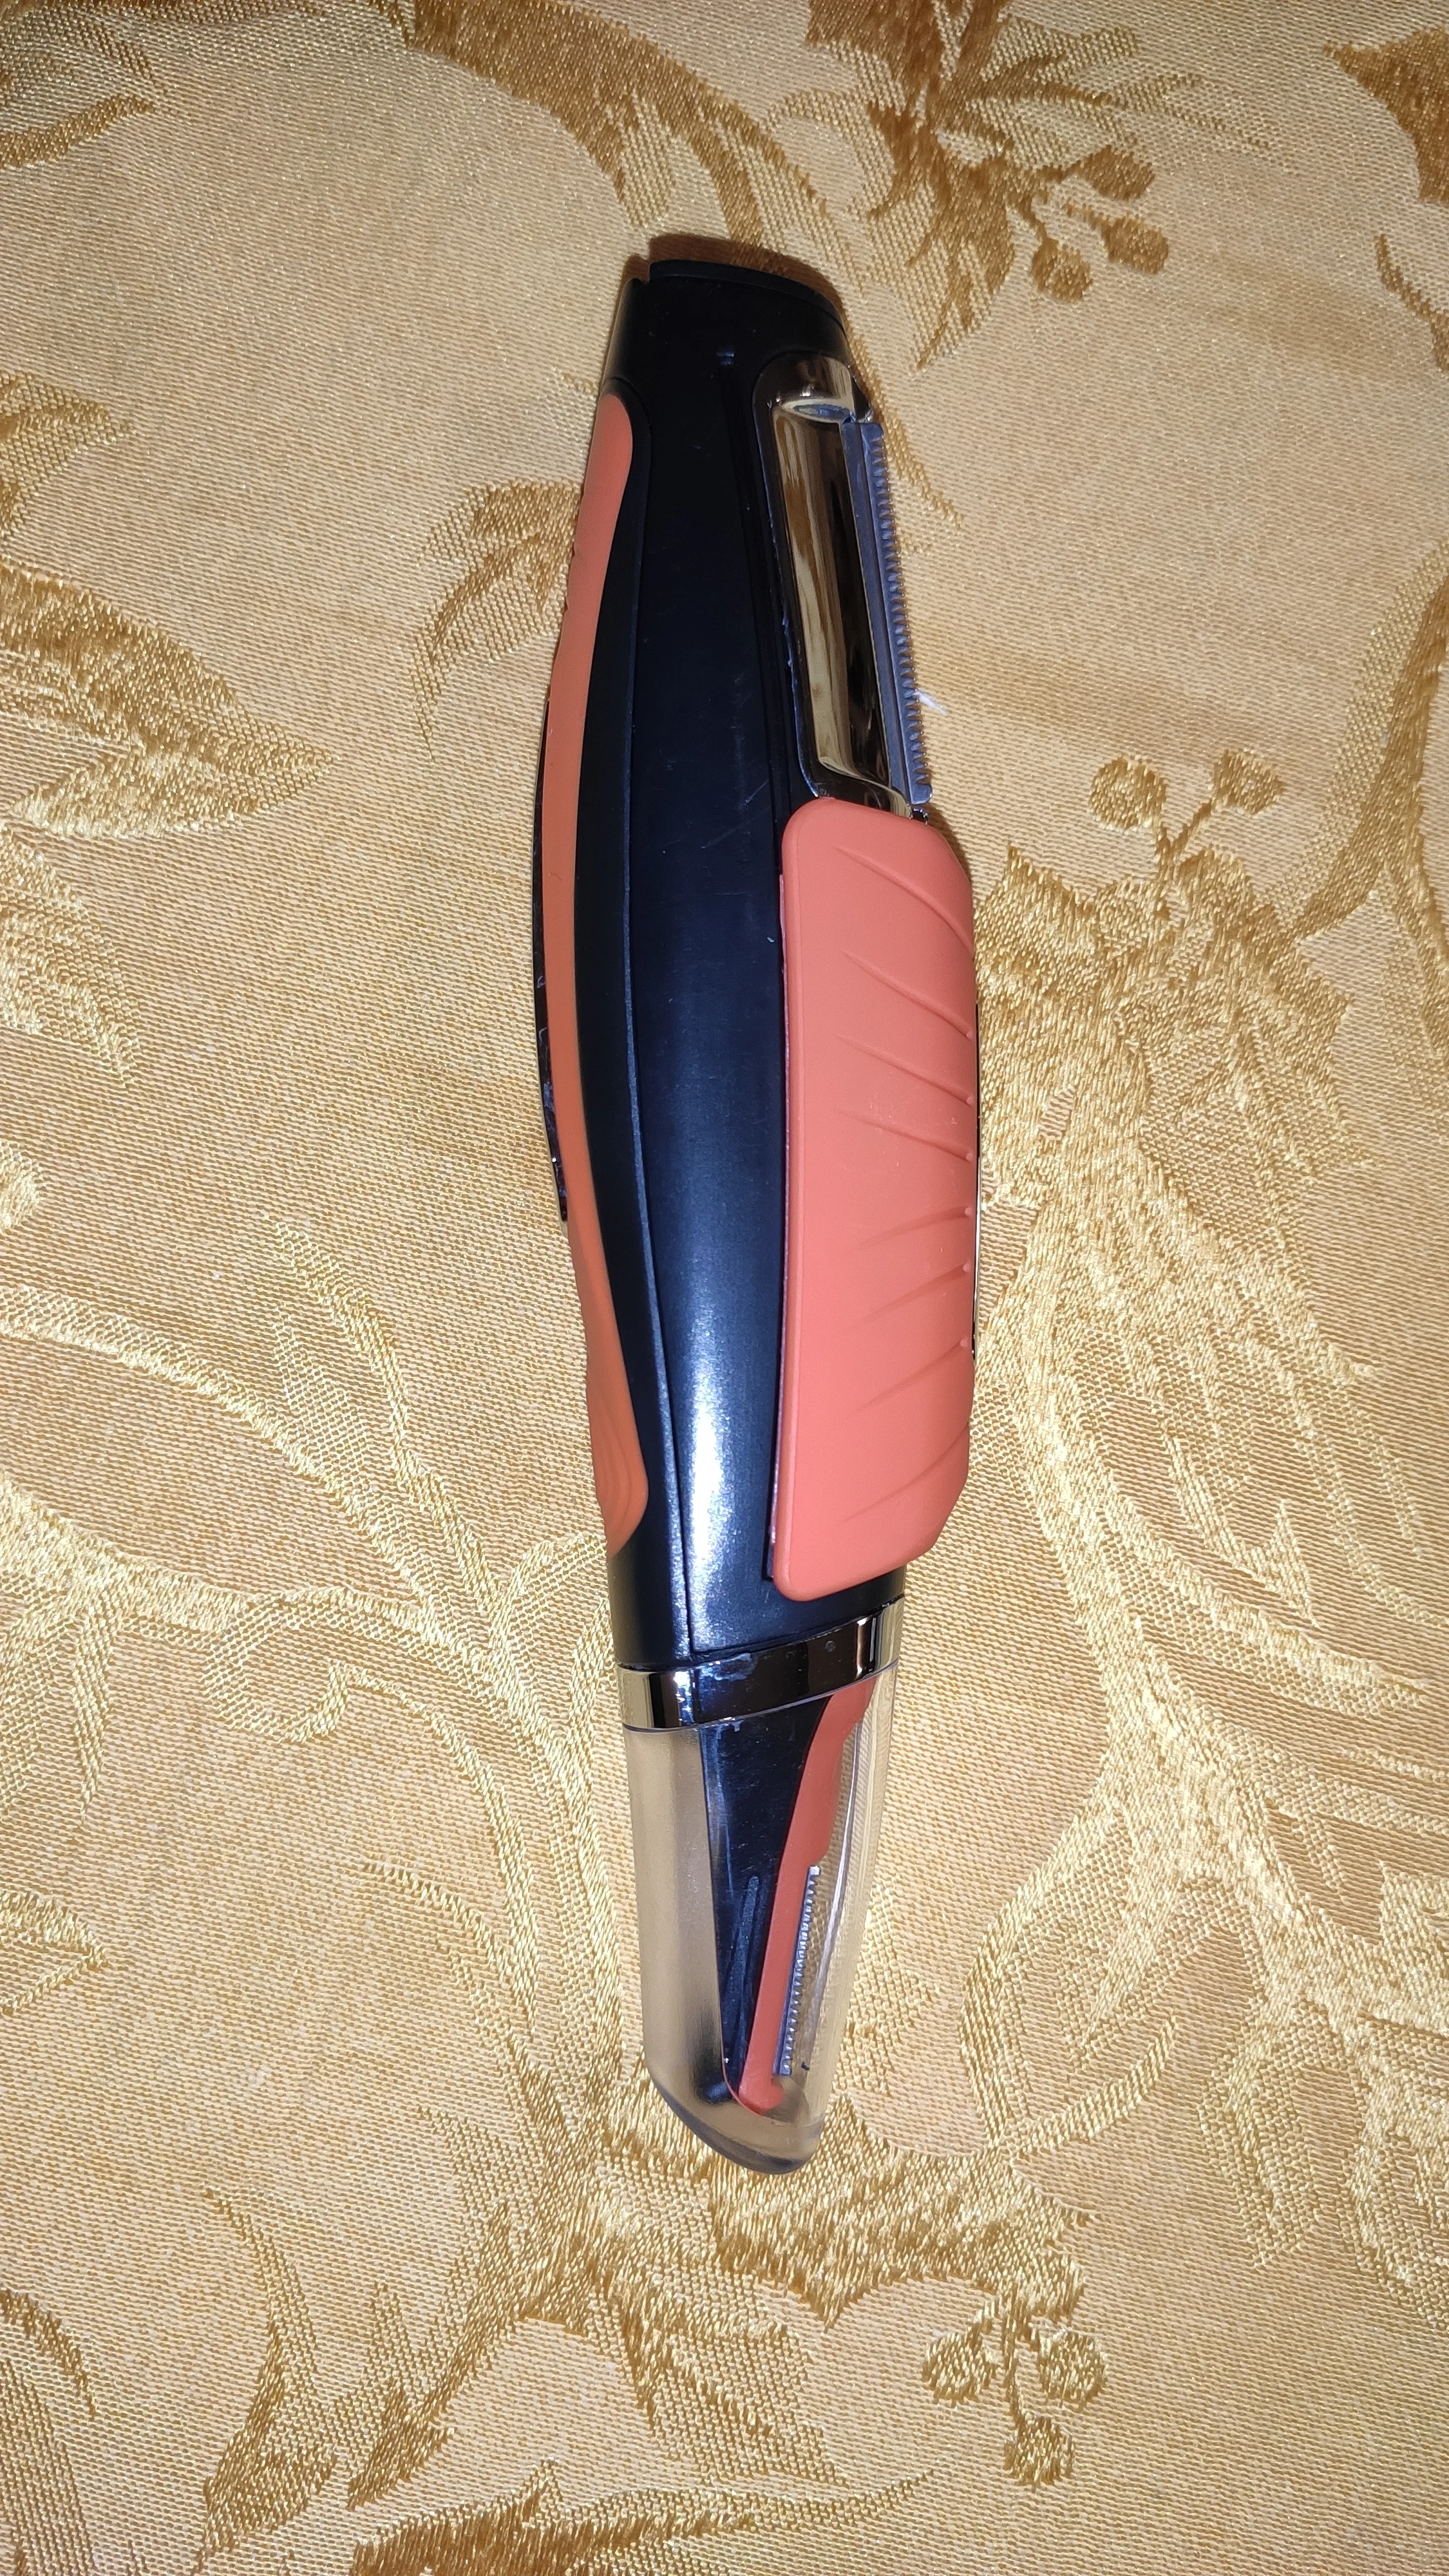 Domom 2 in 1 Hair Trimmer-reshline photo review